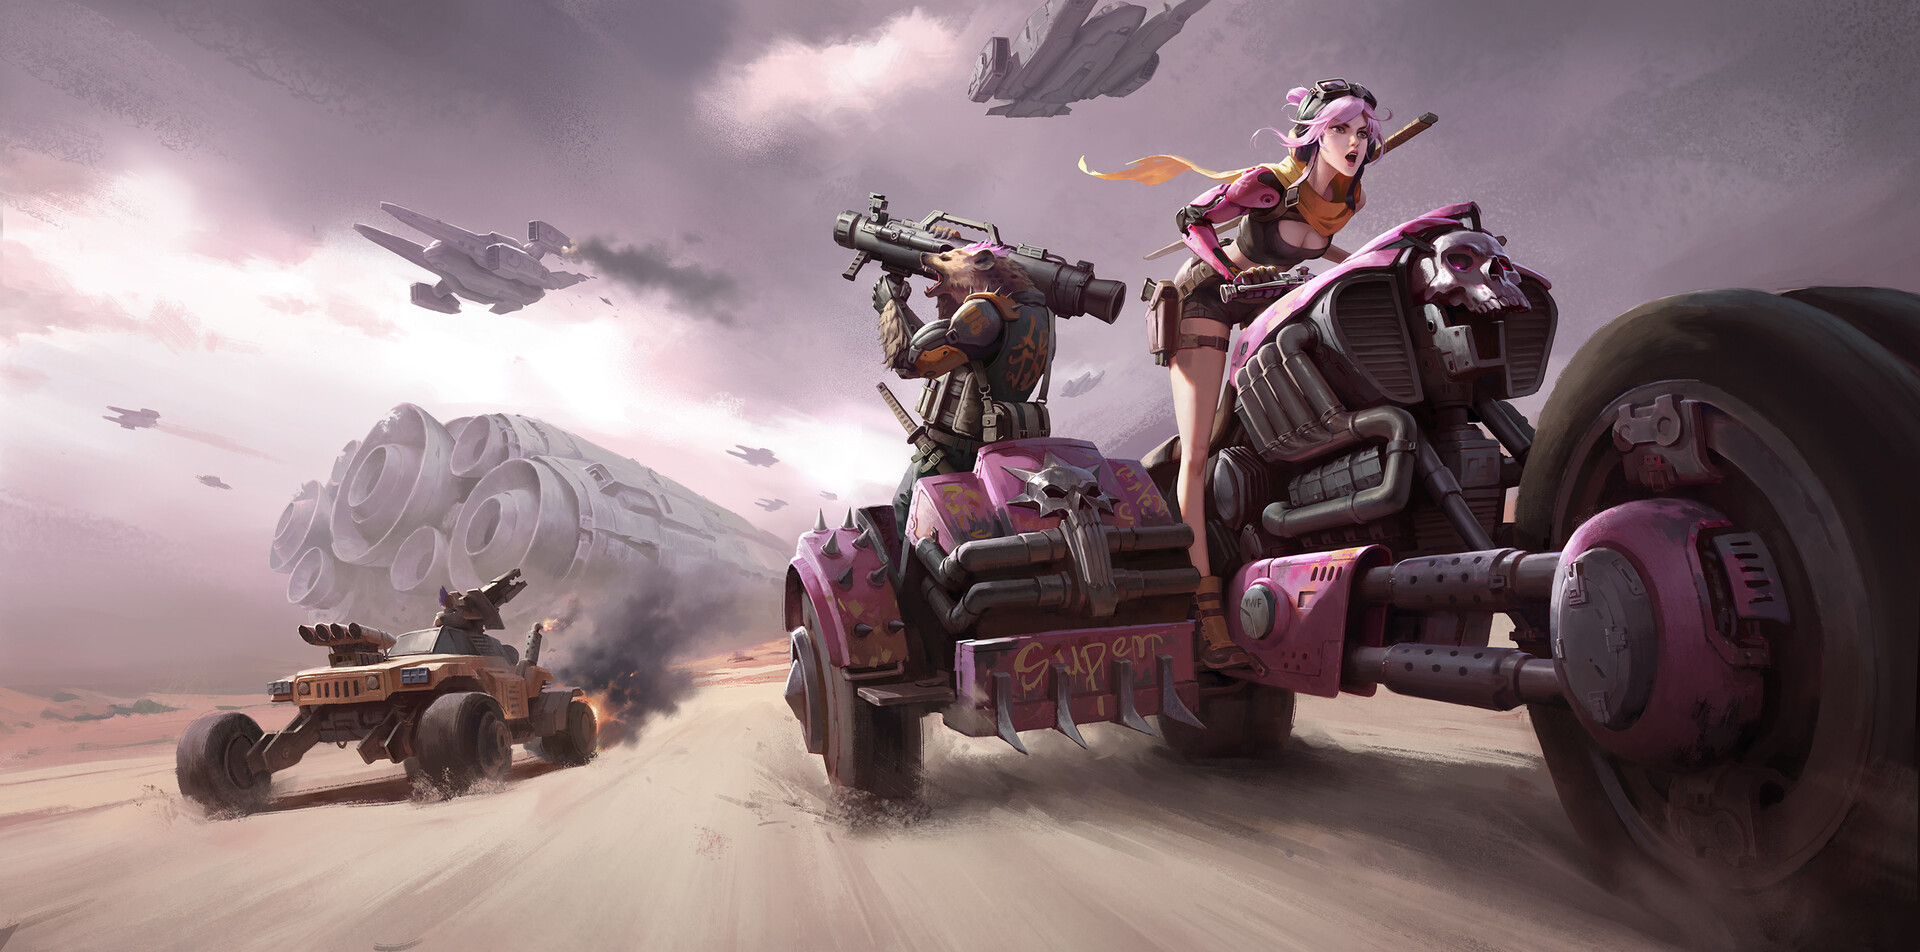 General 1920x952 Wenfei Ye drawing wasteland space shuttle motorcycle pink hair bazookas fighting pink weapon skull science fiction